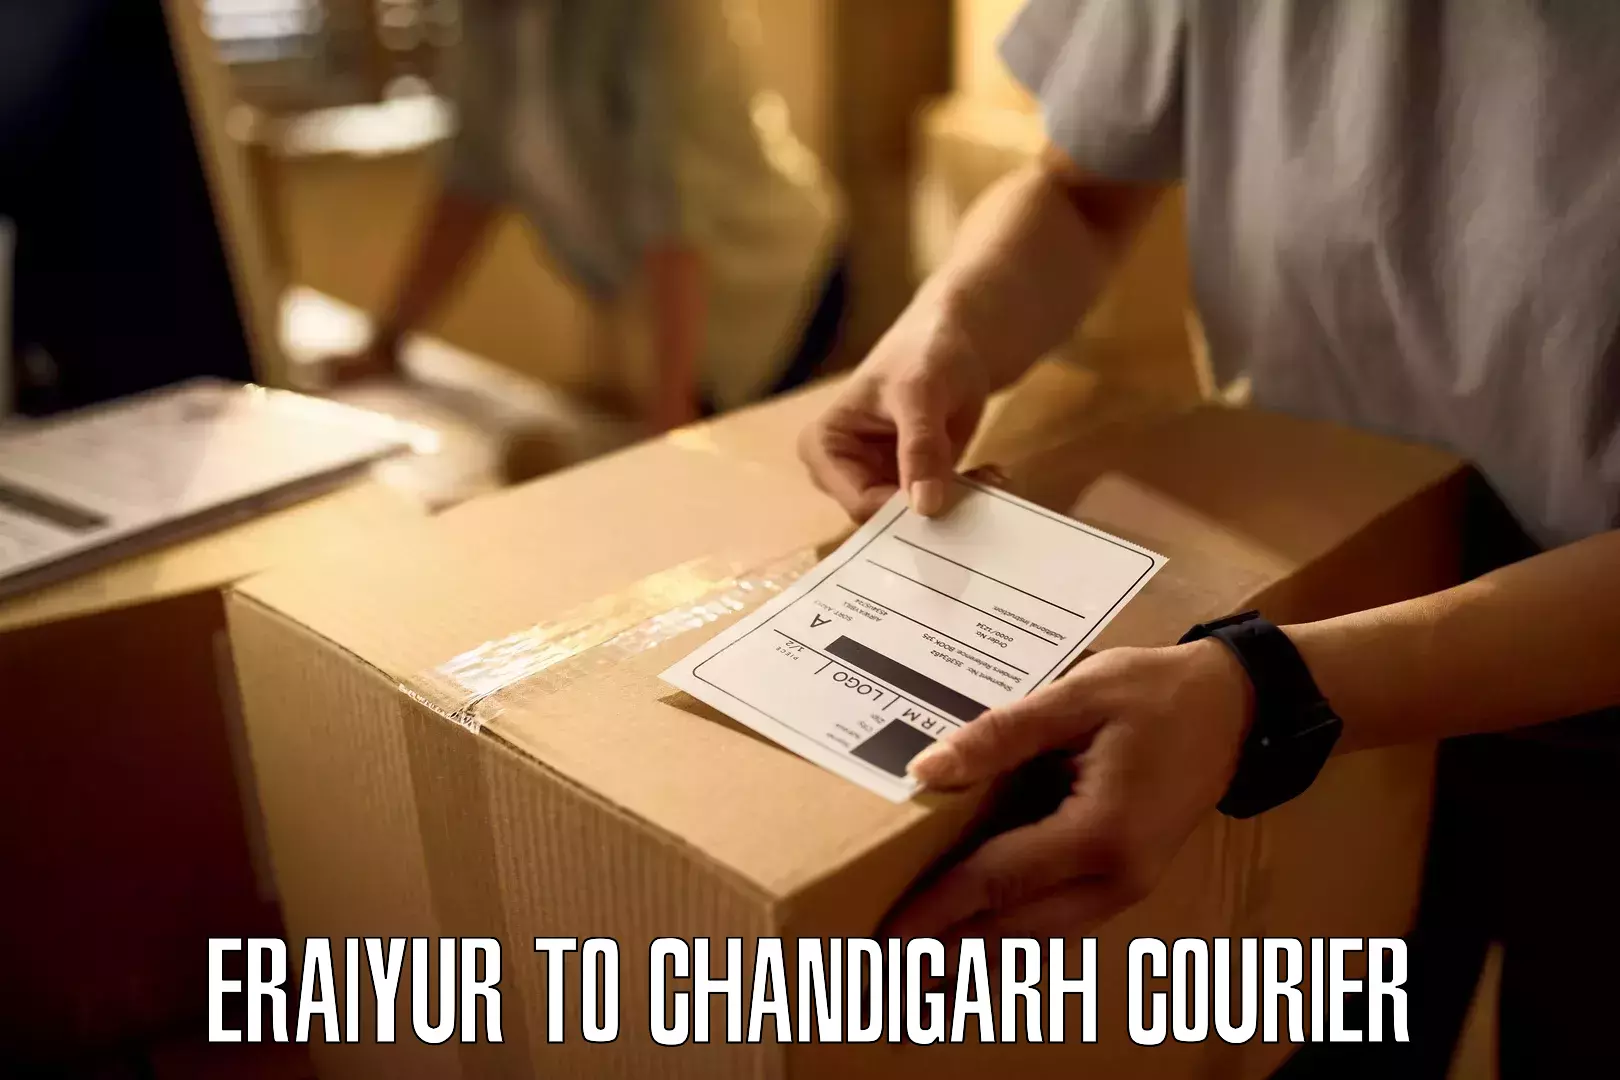 Courier service partnerships in Eraiyur to Chandigarh